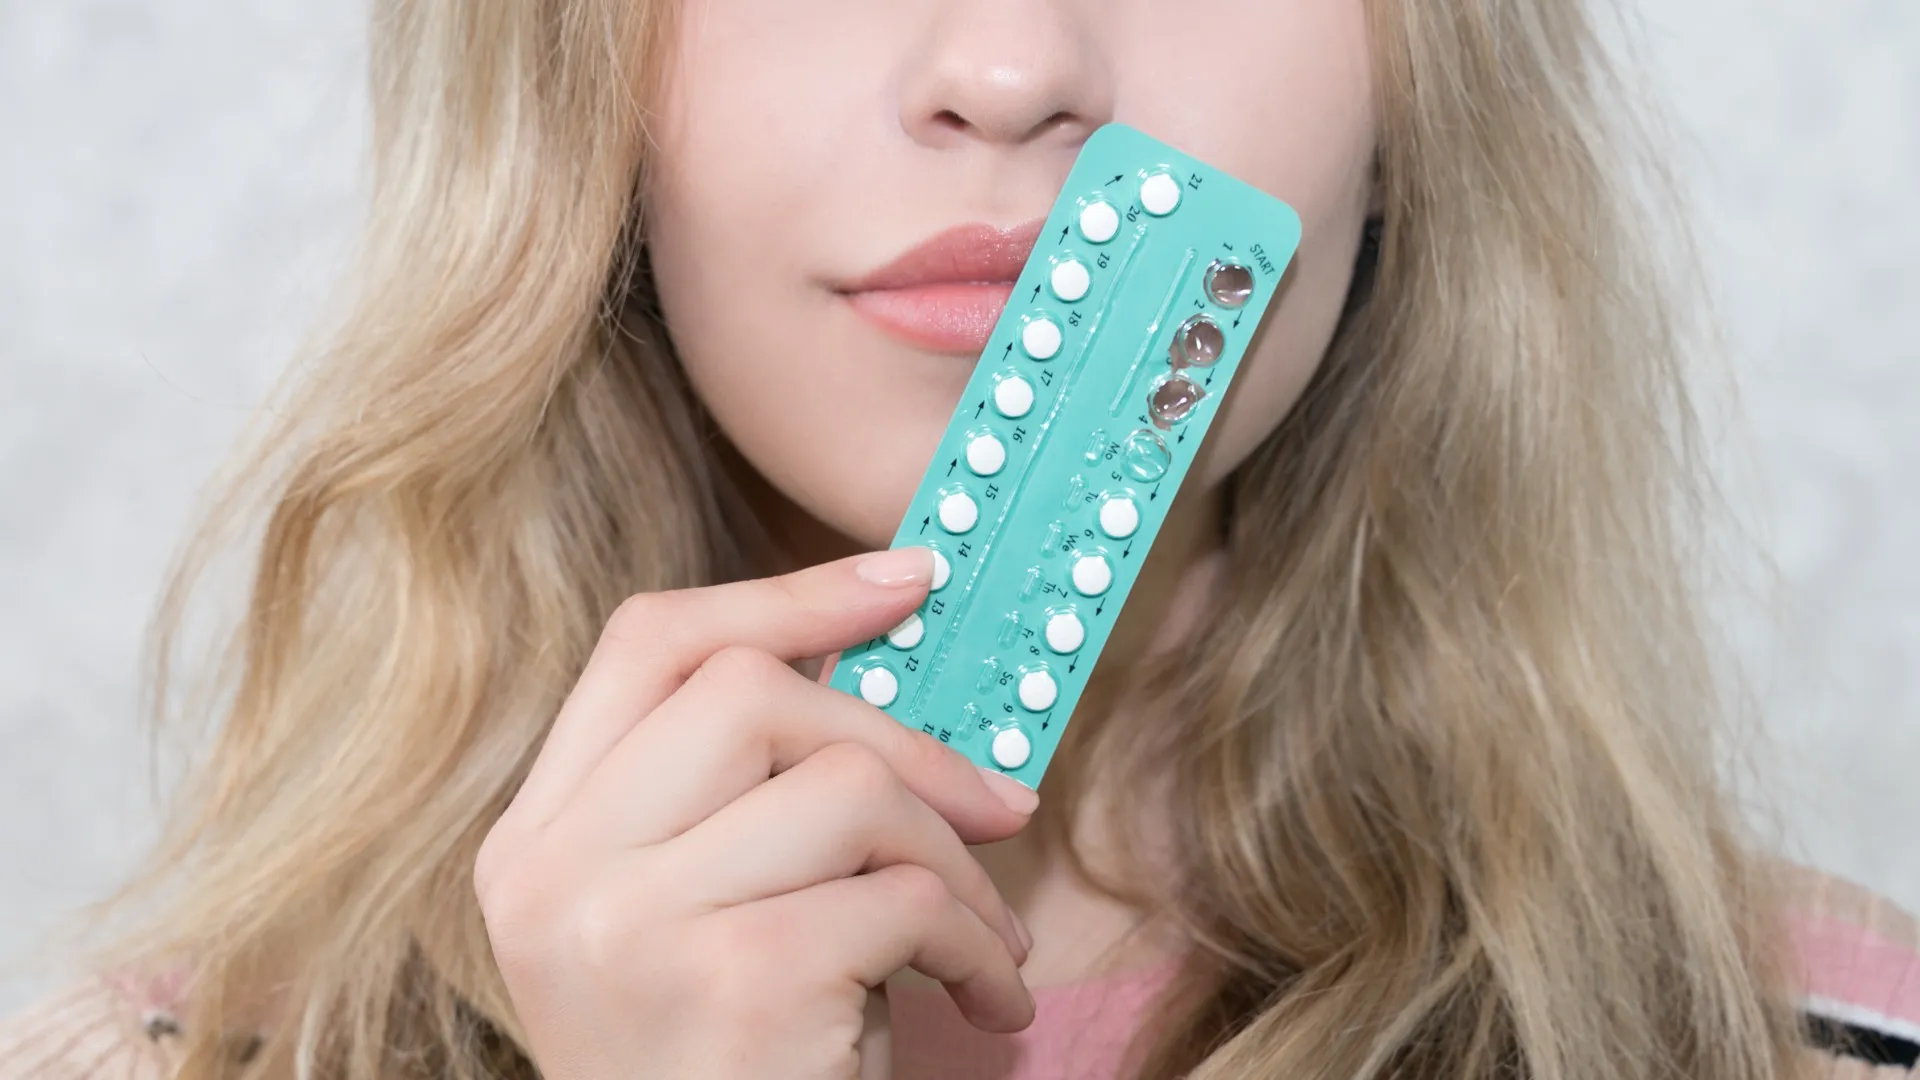 Birth Control Pills: What You Need to Know